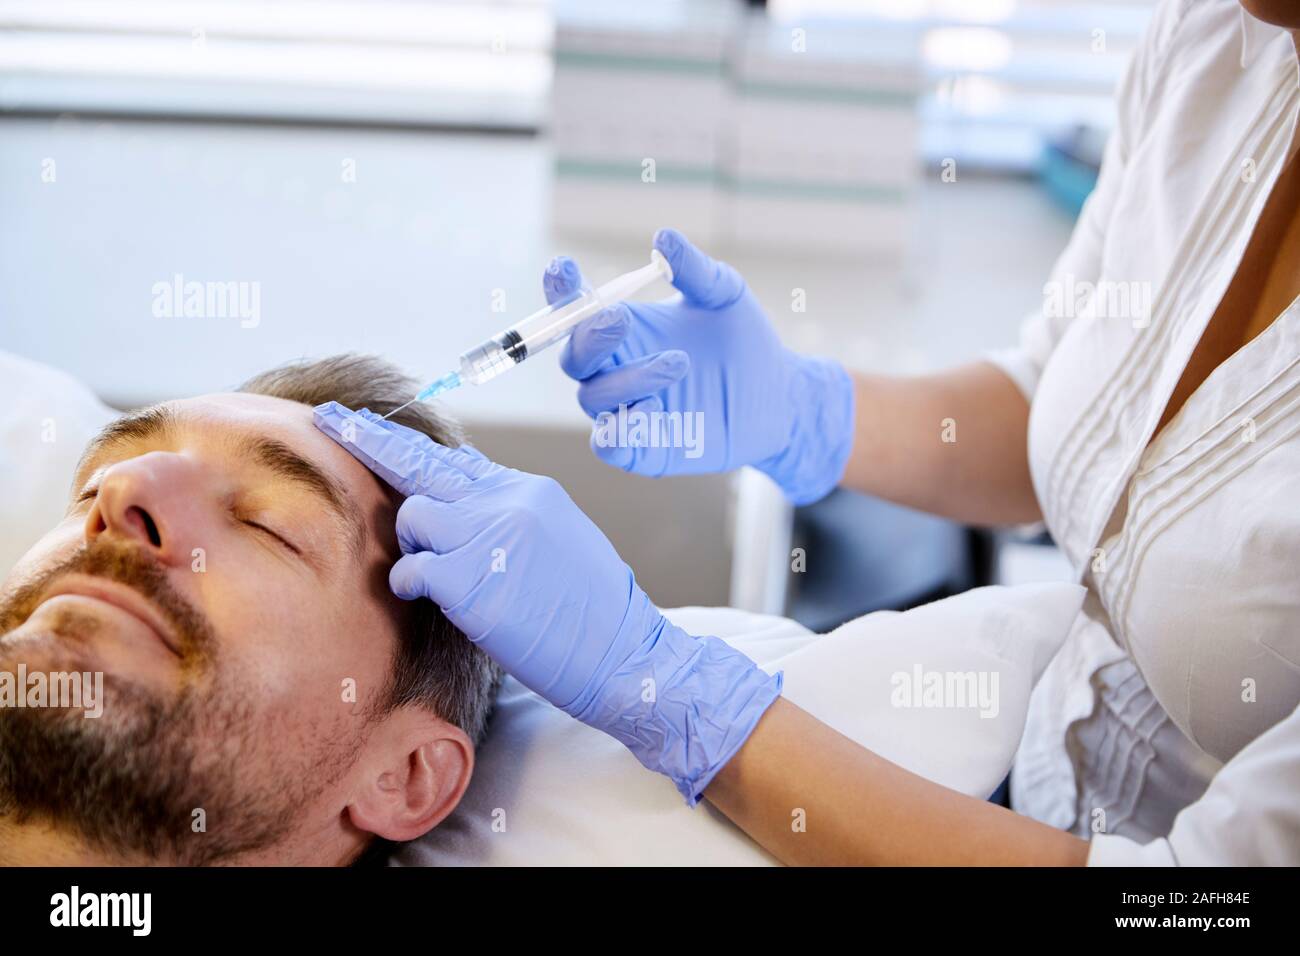 Female Beautician Giving Mature Male Patient Botox Injection In Forehead Stock Photo